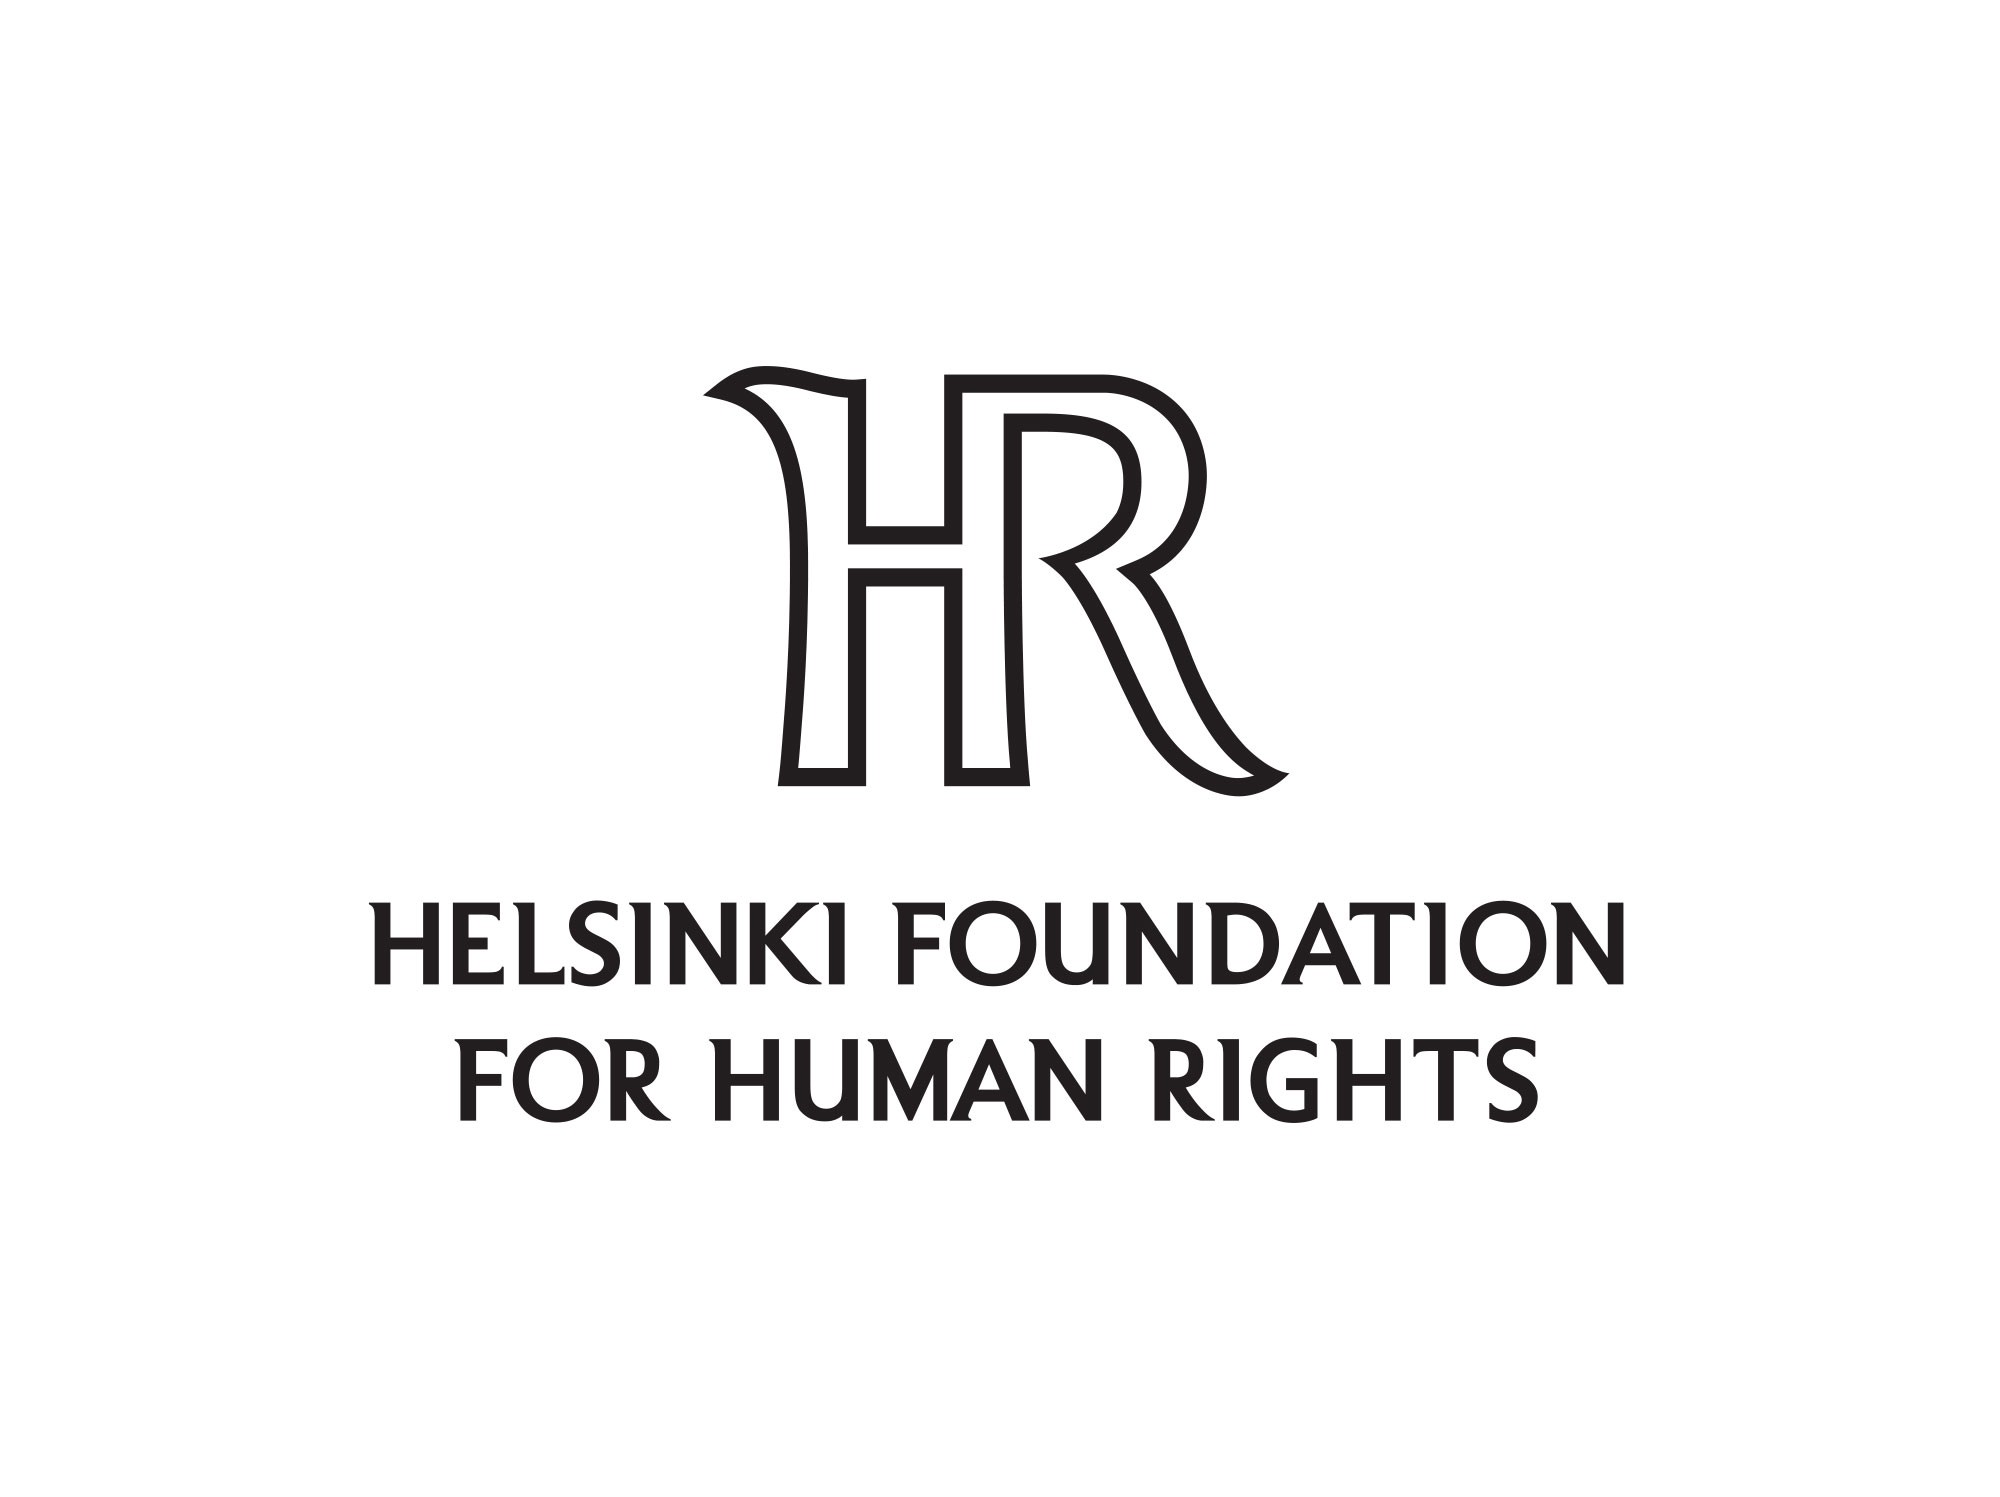 Helsinki Foundation for human rights